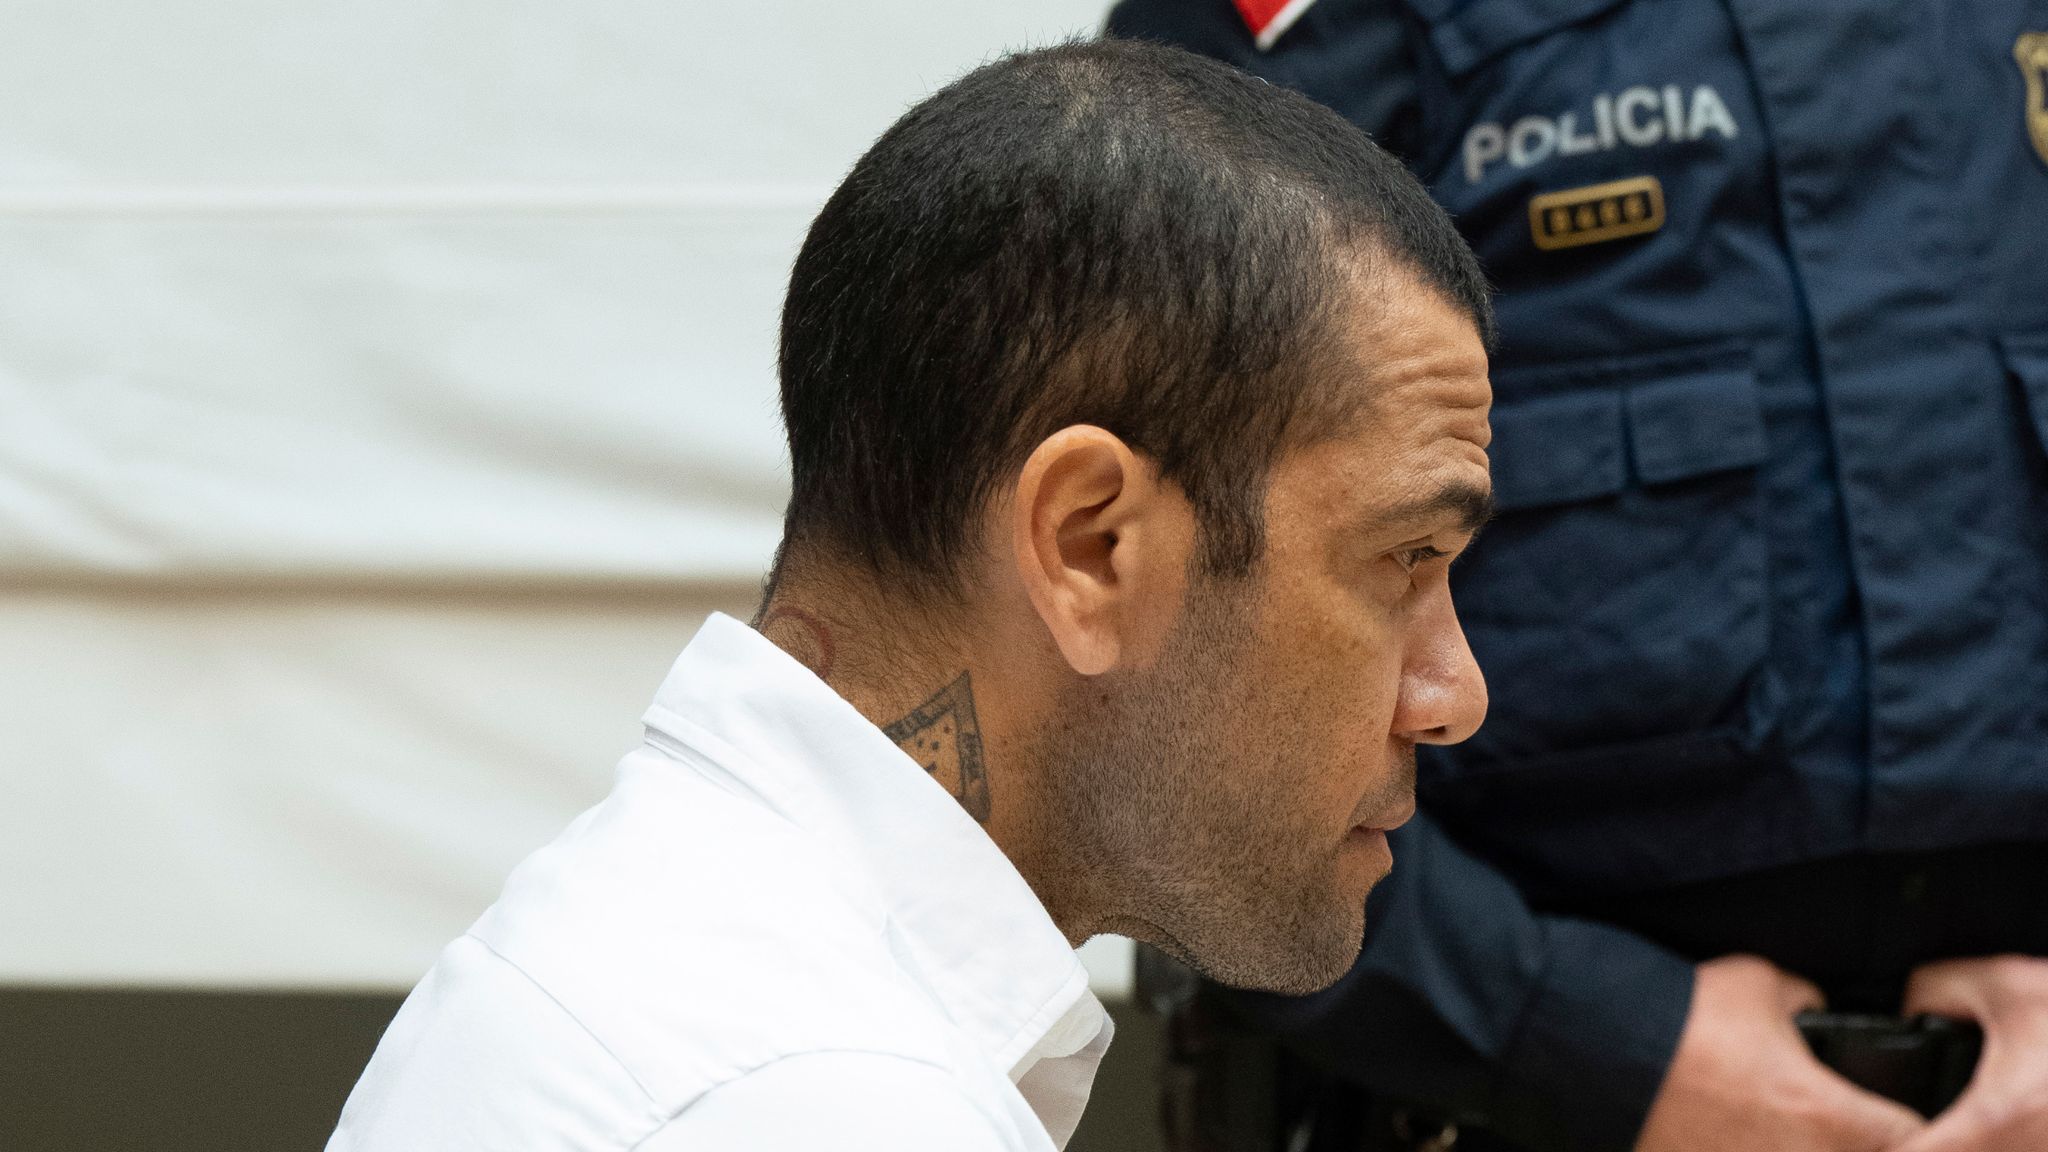 Dani Alves sentenced to 4 and a half years in prison over rape case